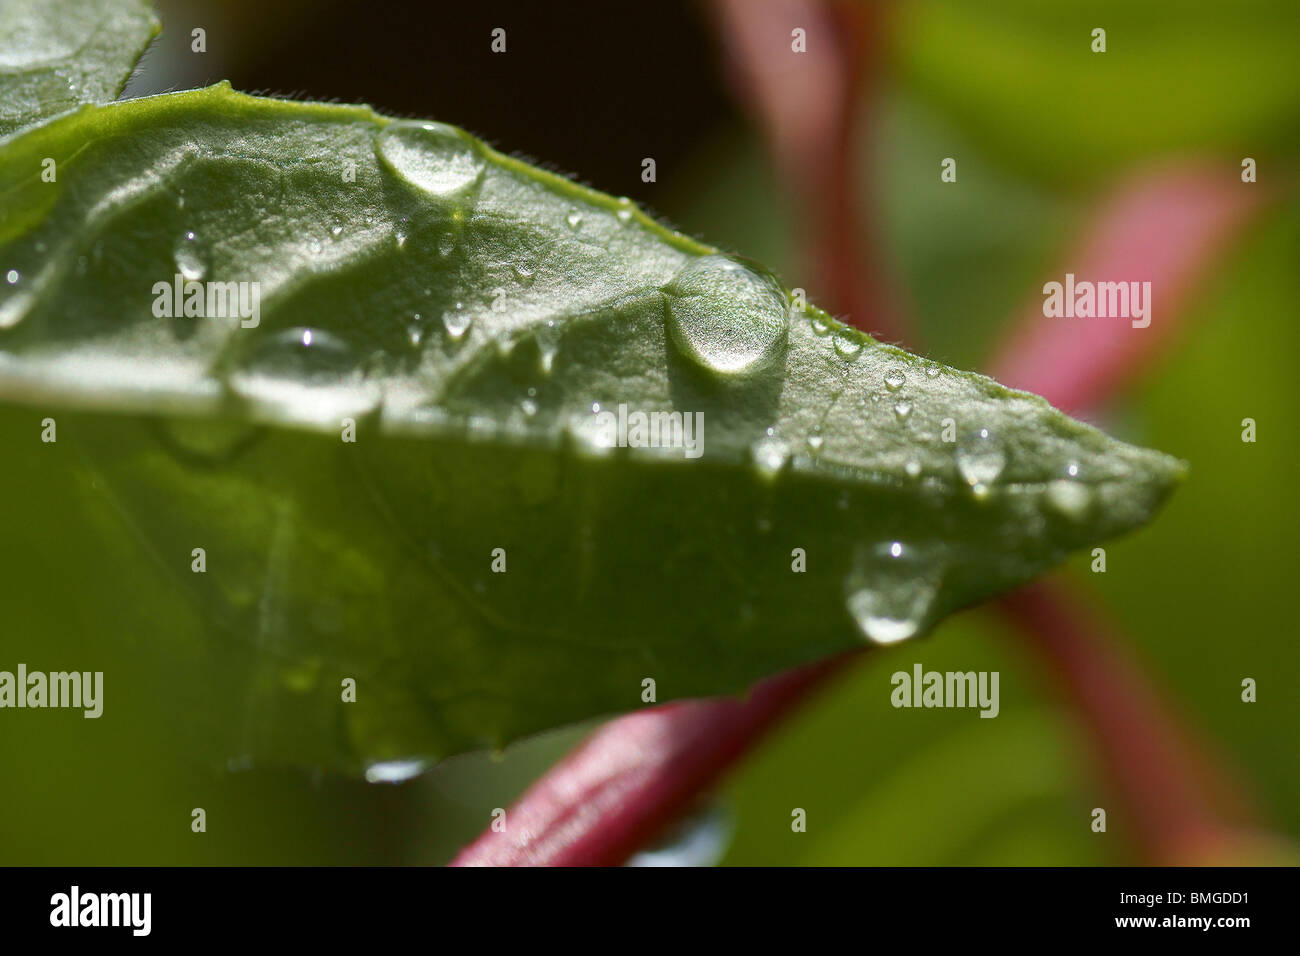 Rain drops on Clematis leaf Stock Photo